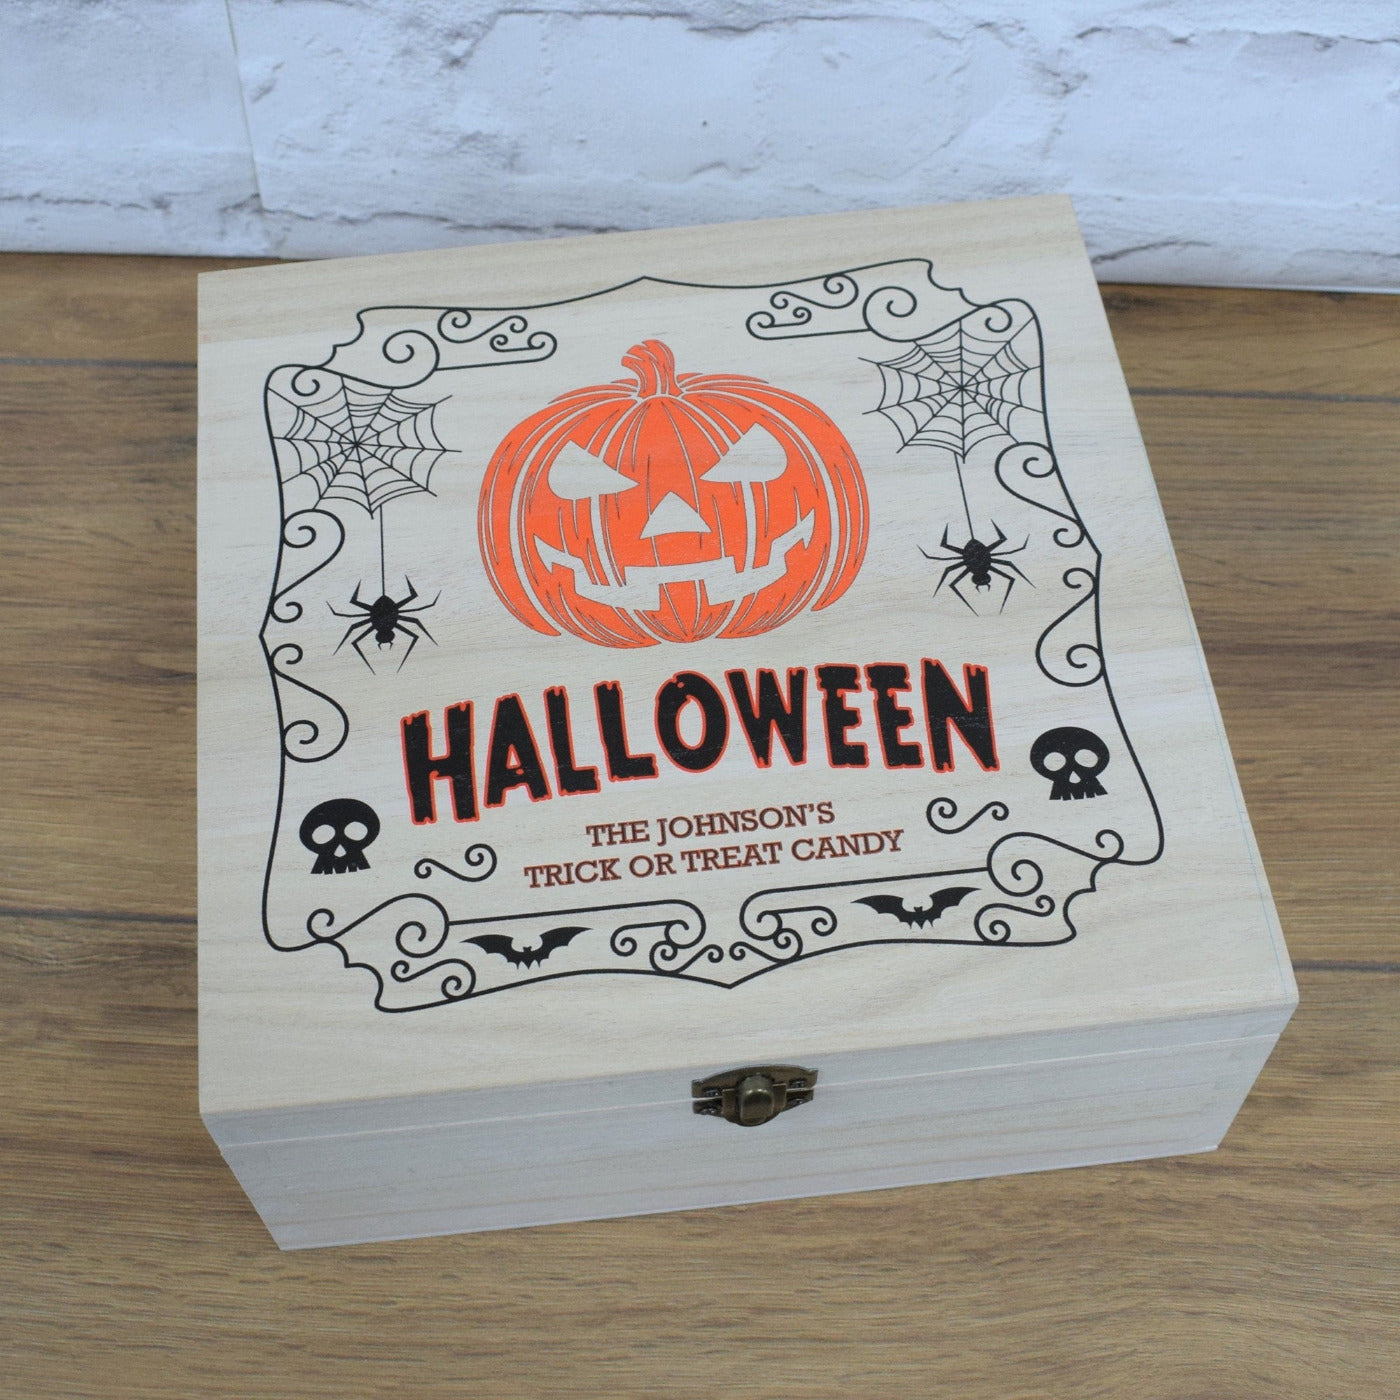 Halloween Trick Or Treat Sweet Box - Personalised Halloween Candy Box